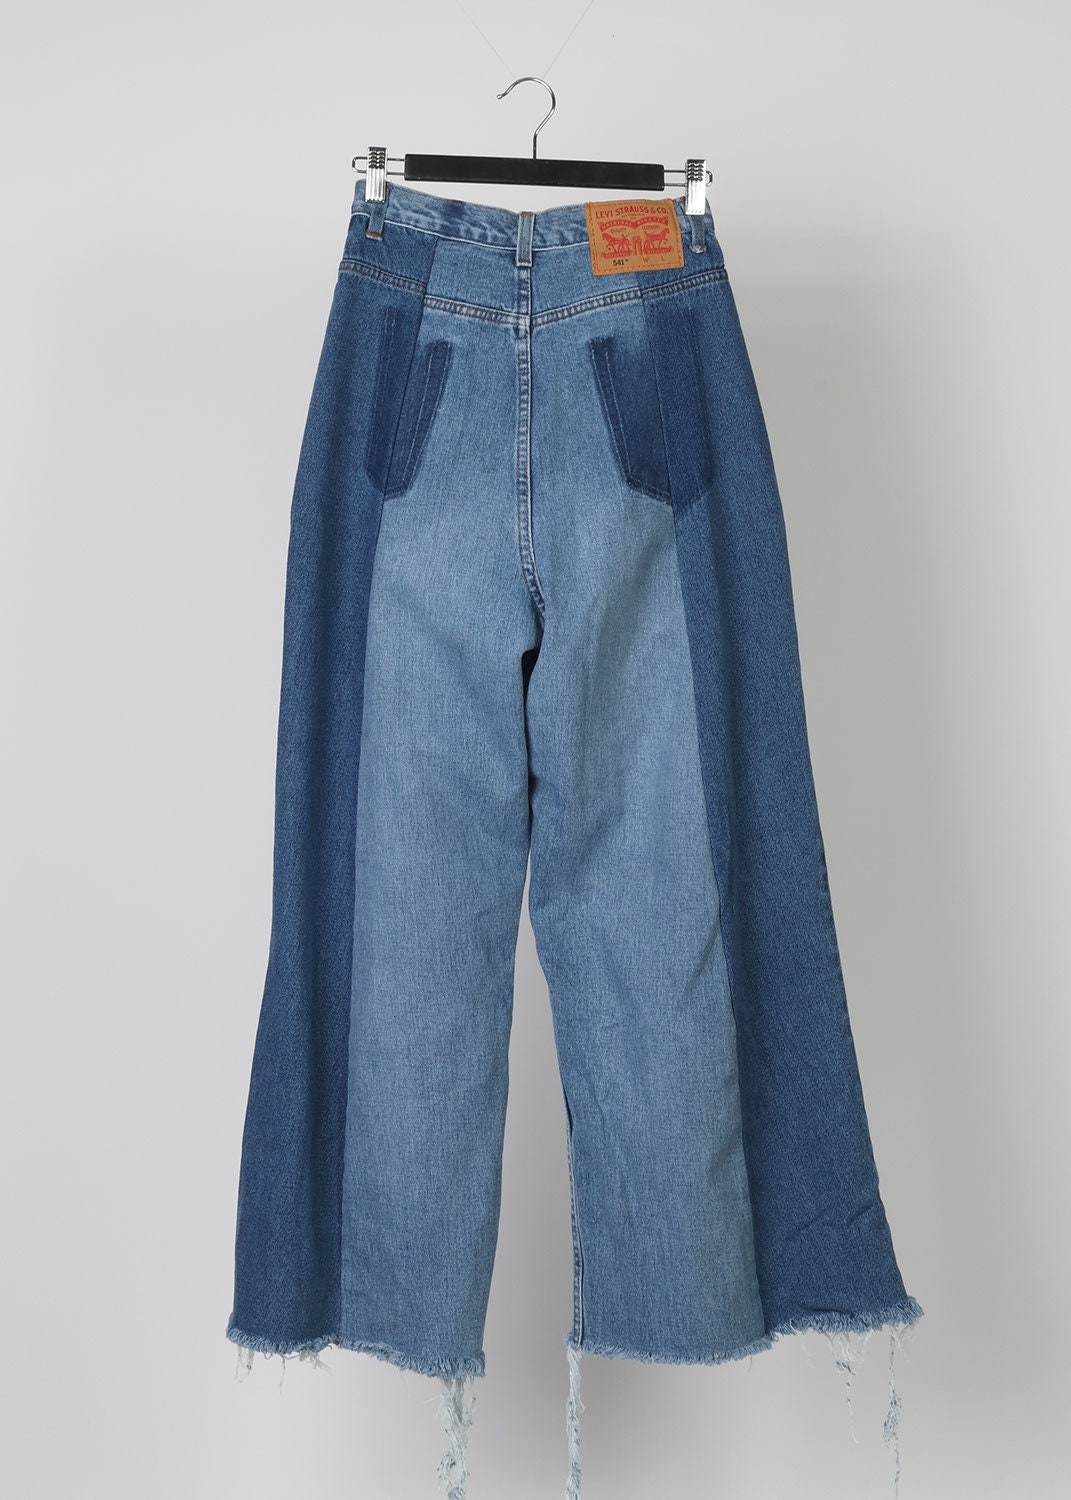 W25' L27' Levi's Flares / Vintage High Waisted - Etsy